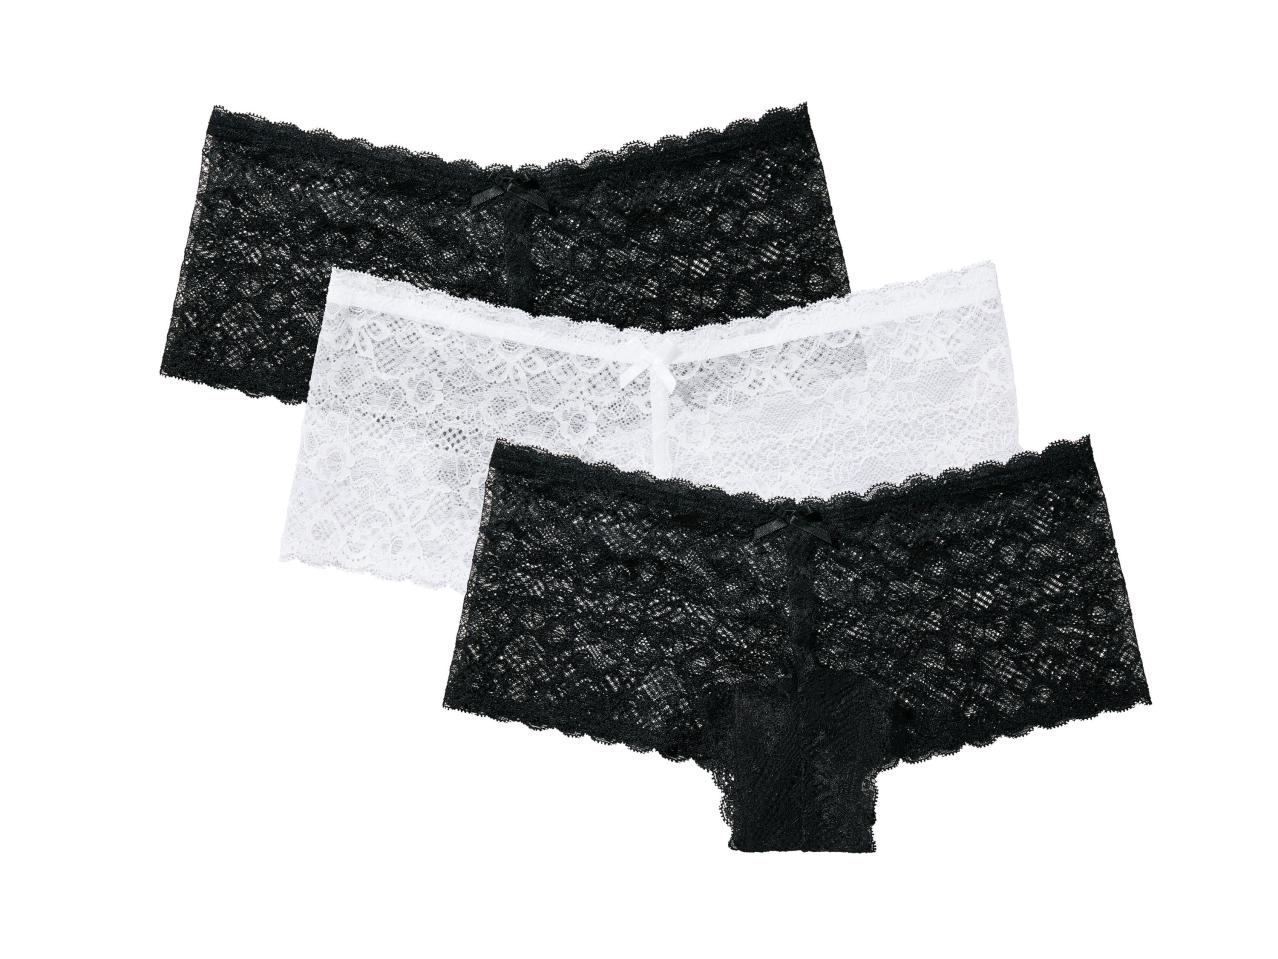 Ladies' Lace Hipster Briefs